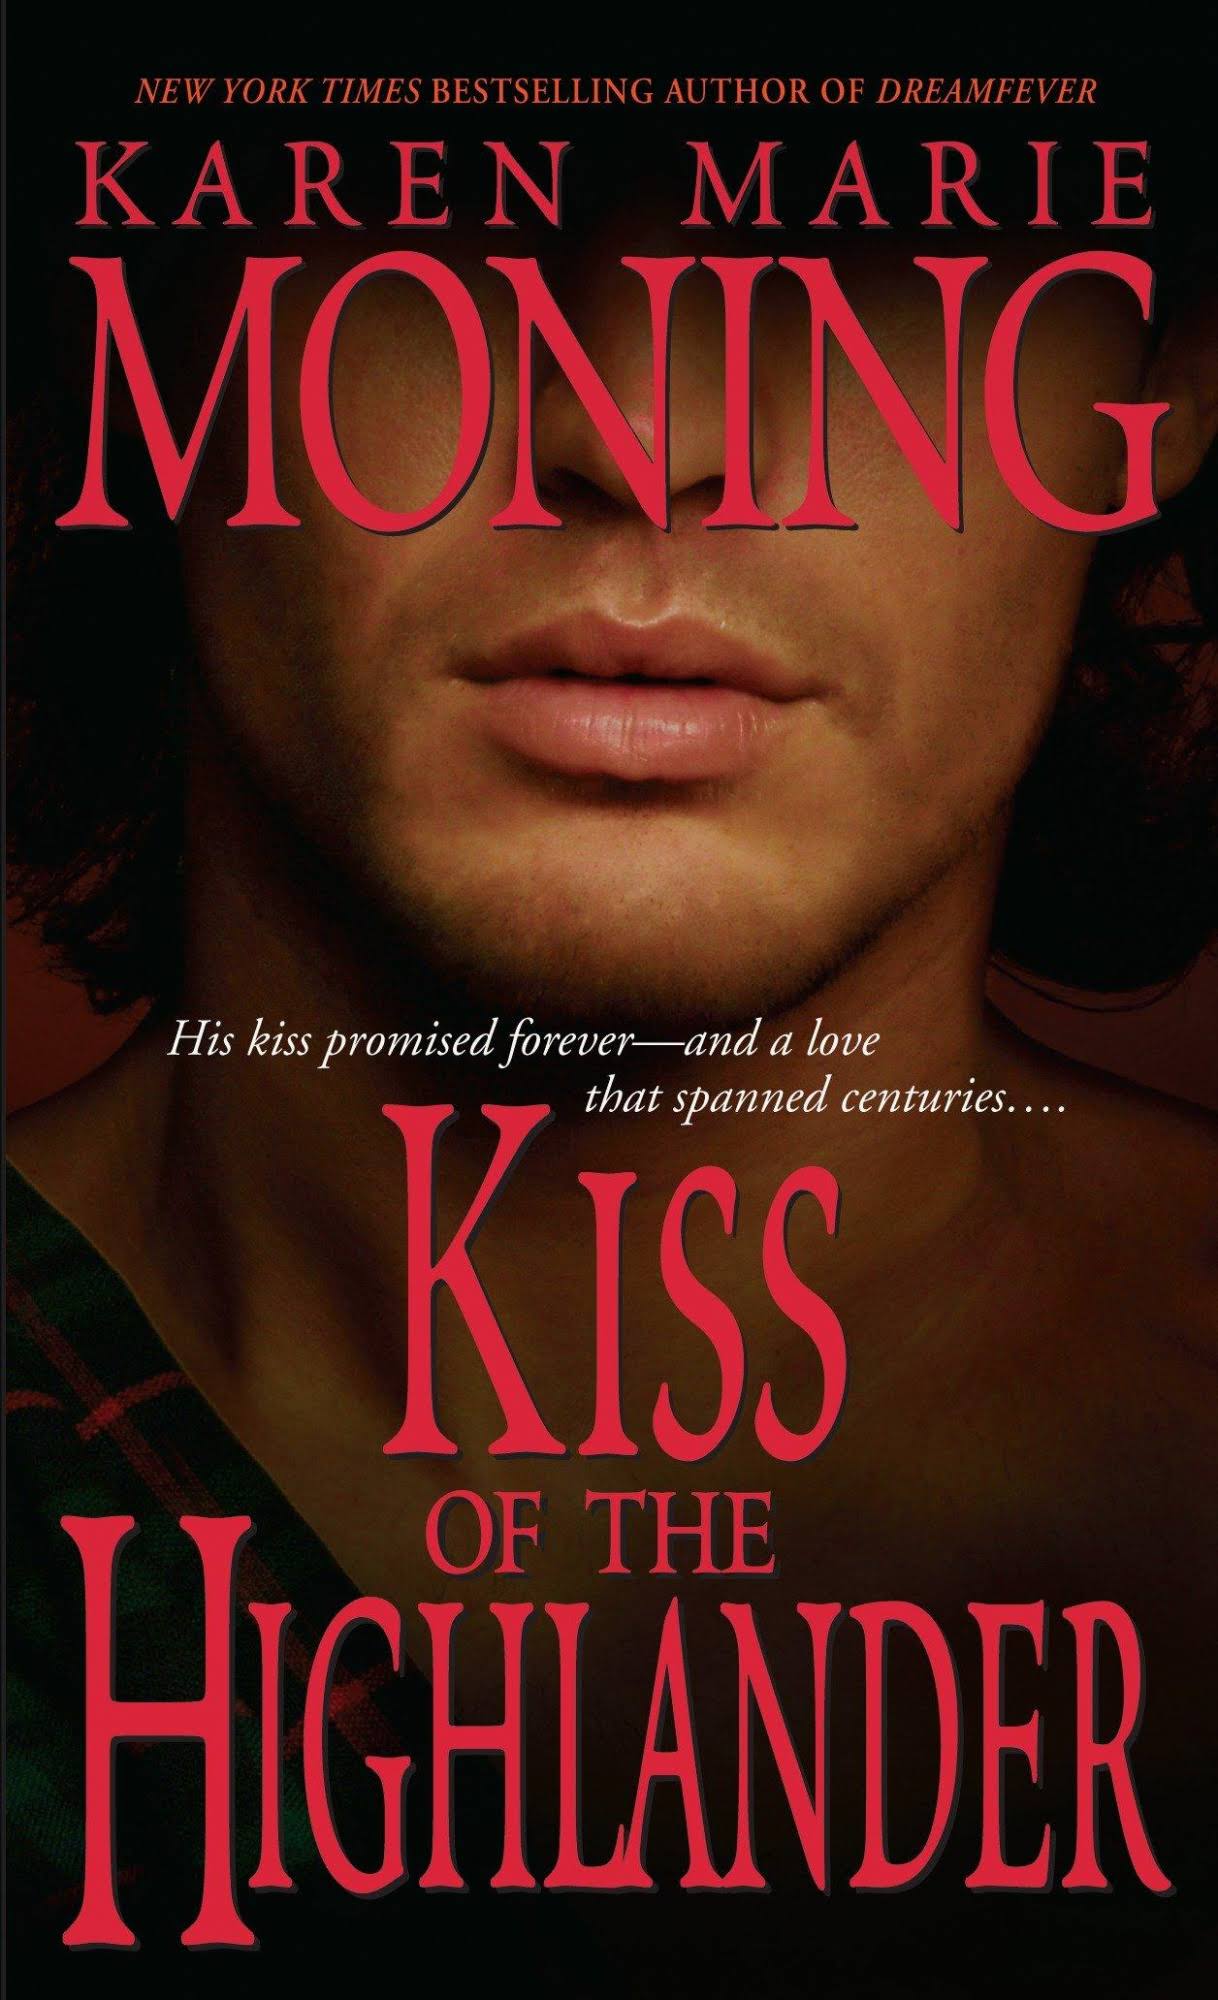 Kiss of the Highlander [Book]